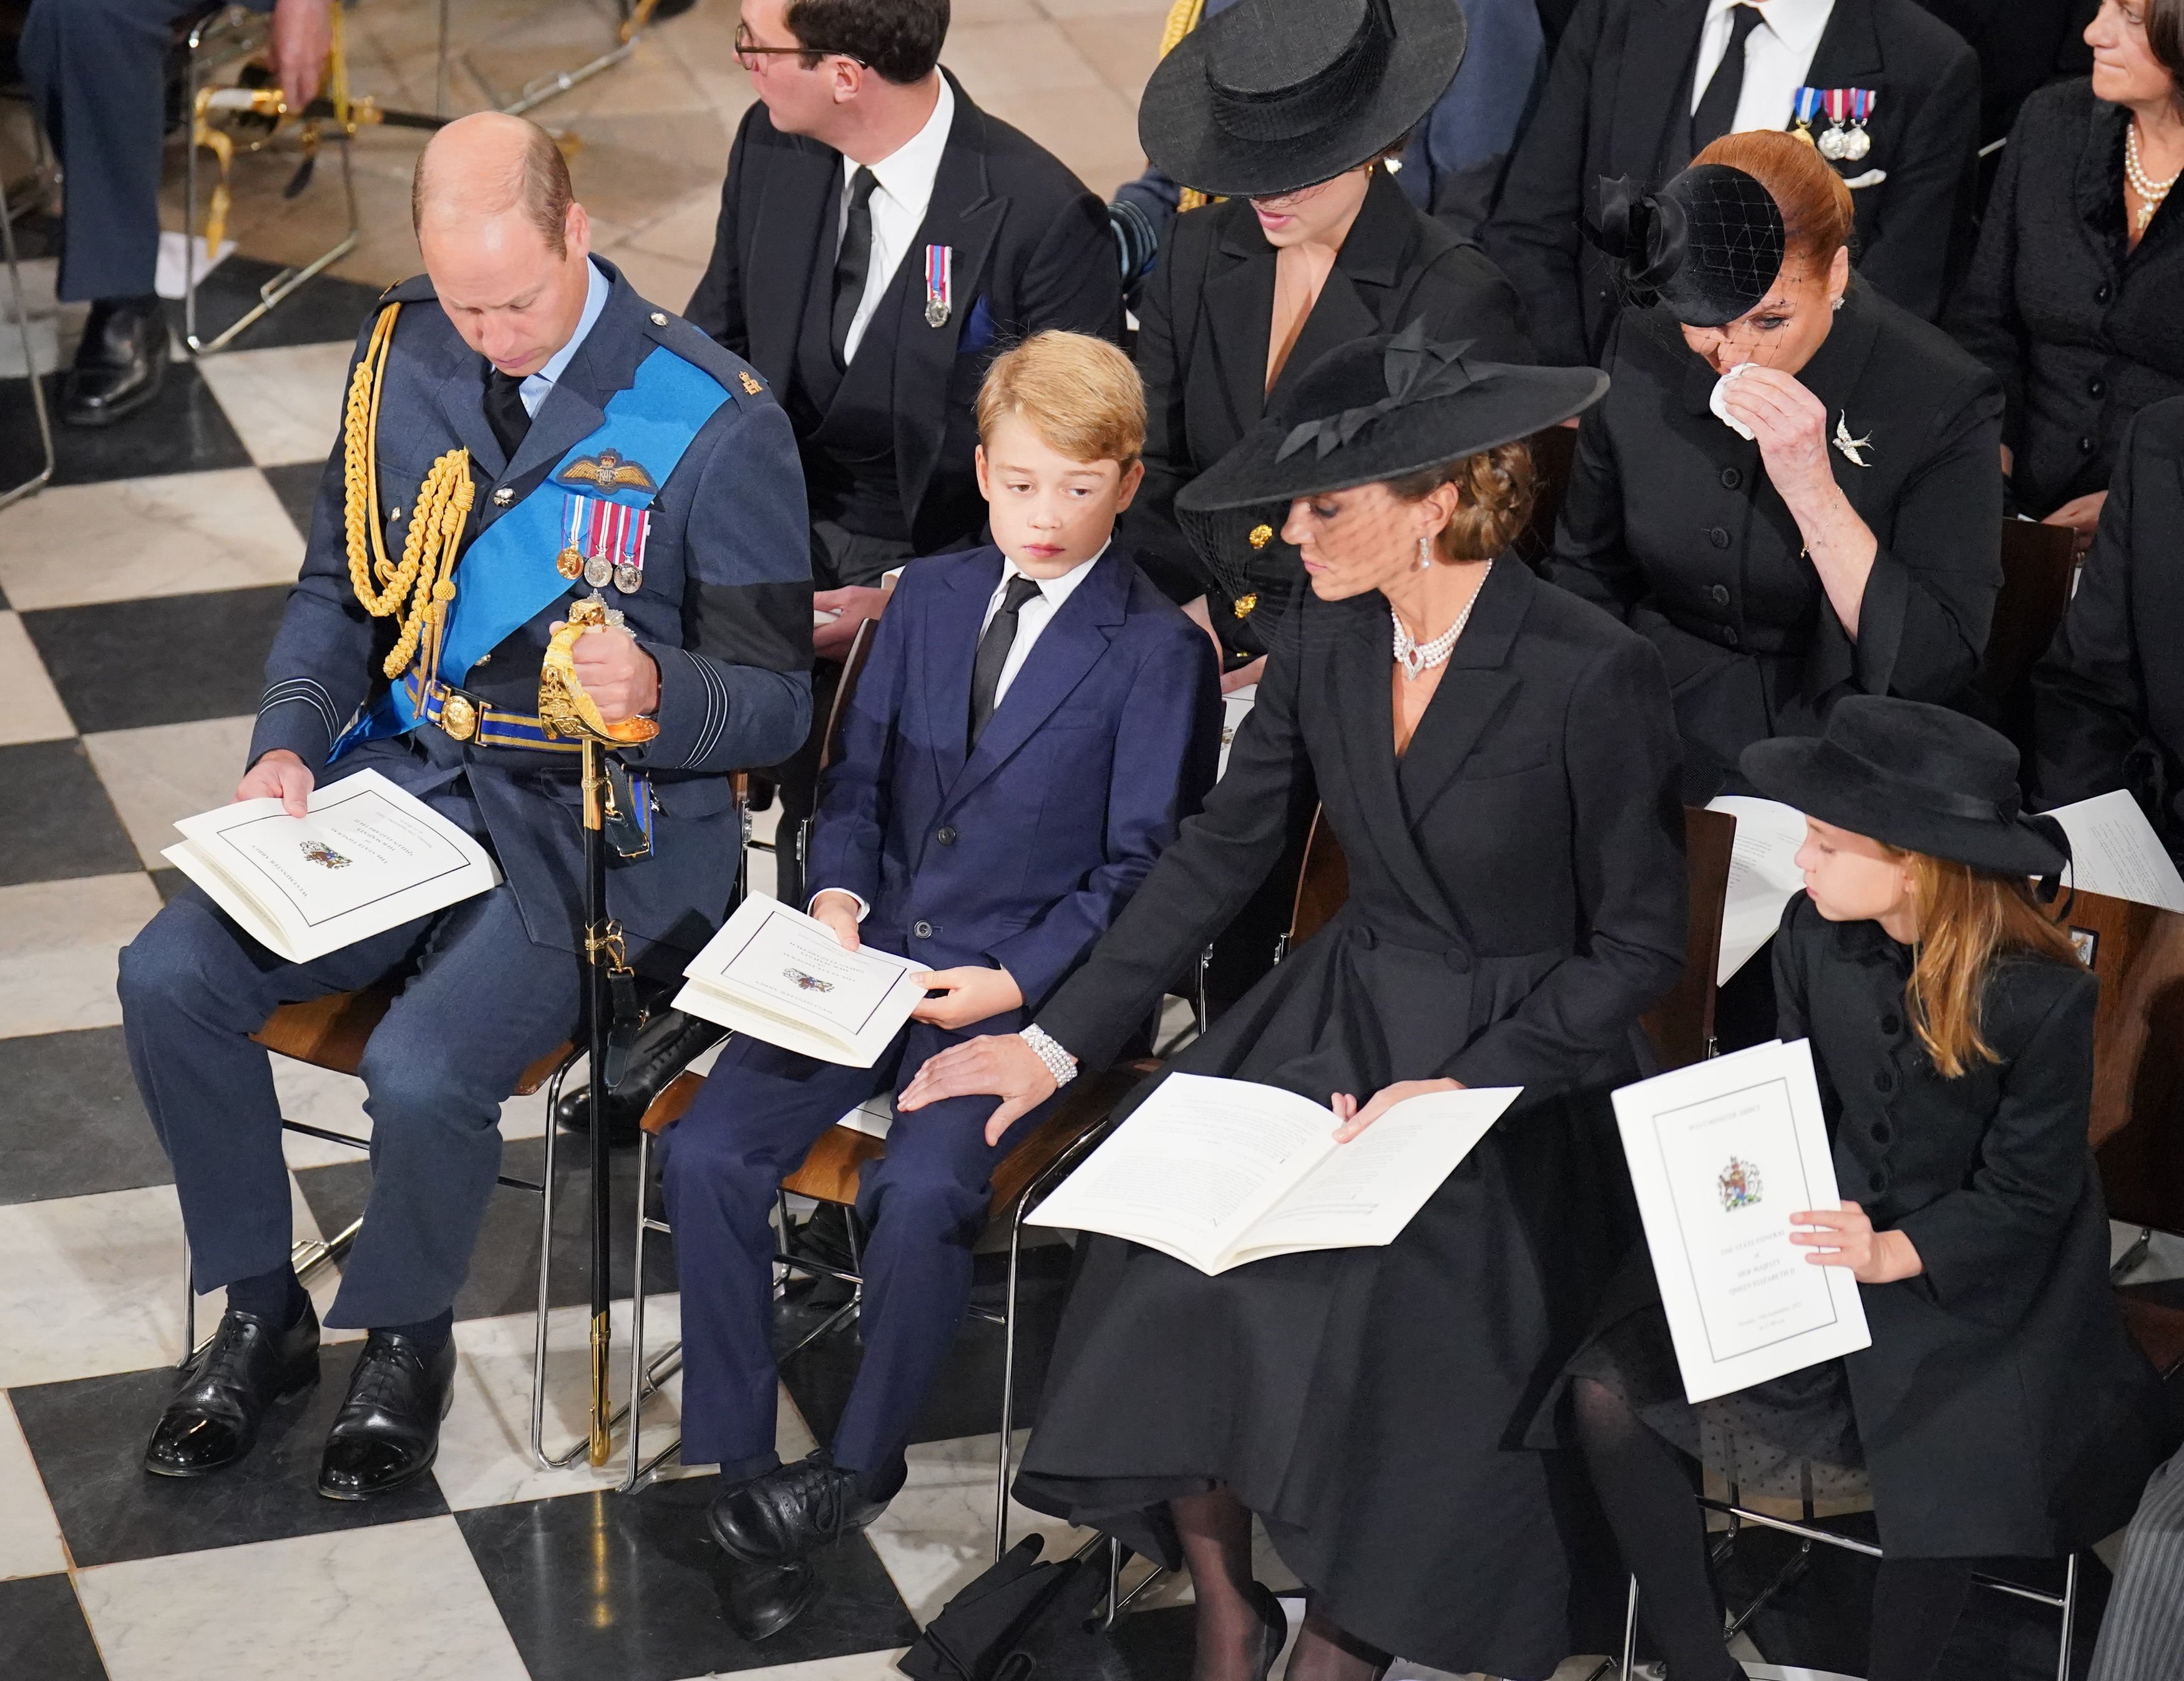 Prince William, Prince George, Princess Kate, and Princess Charlotte in front of the coffin during the State Funeral of Queen Elizabeth II at Westminster Abbey on September 19, 2022, in London, England | Source: Getty Images